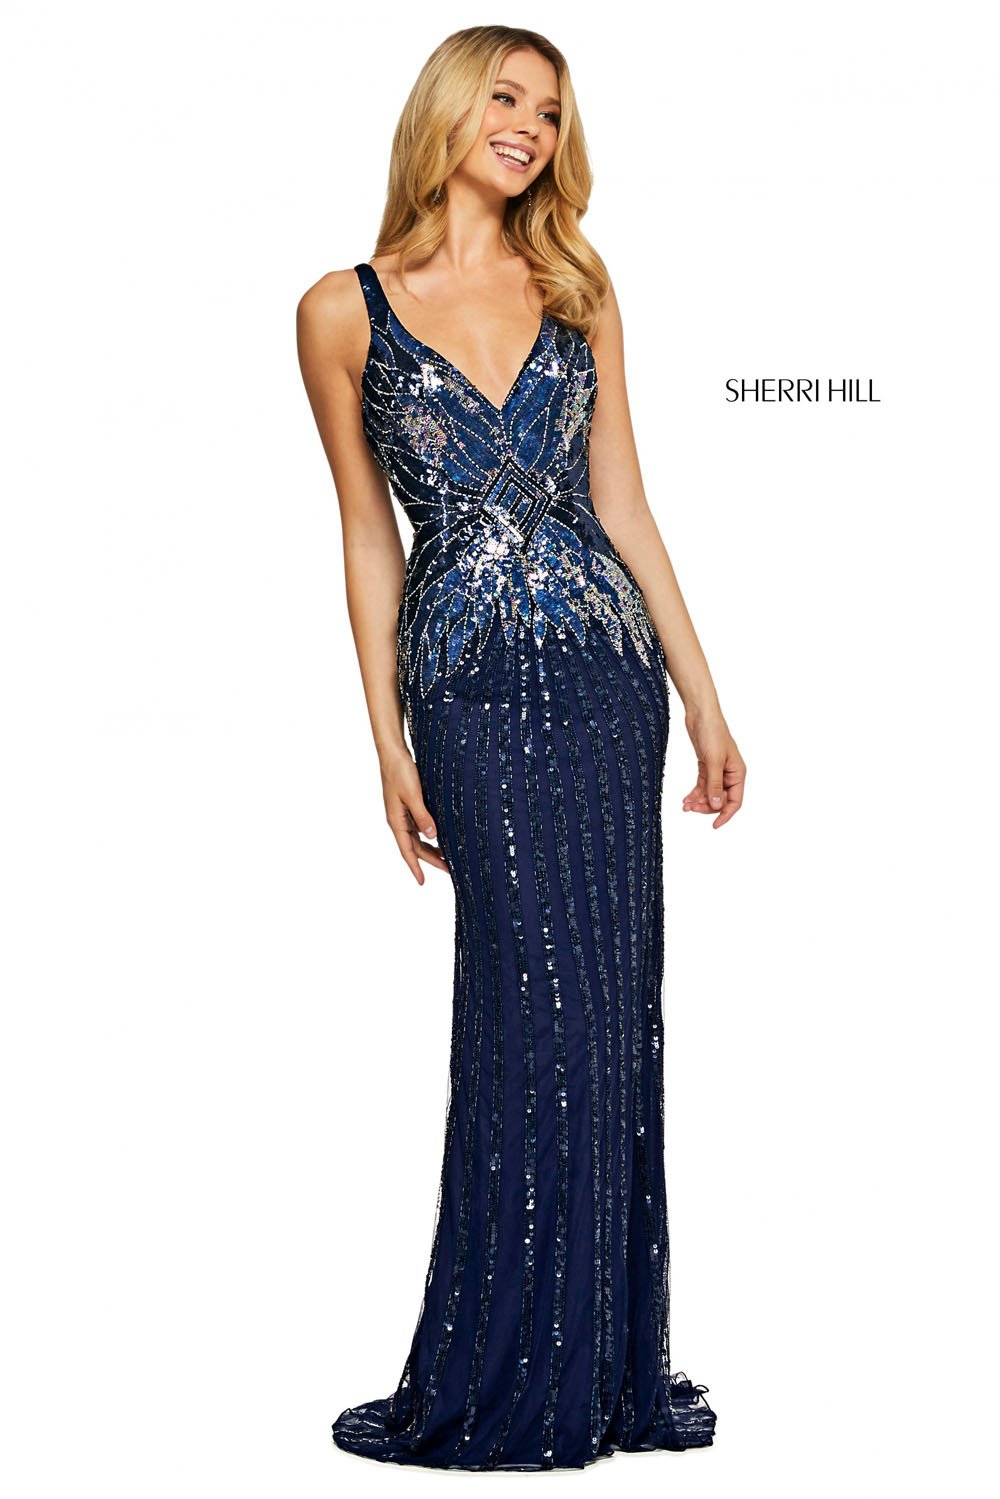 Sherri Hill 53593 dress images in these colors: Navy Silver.